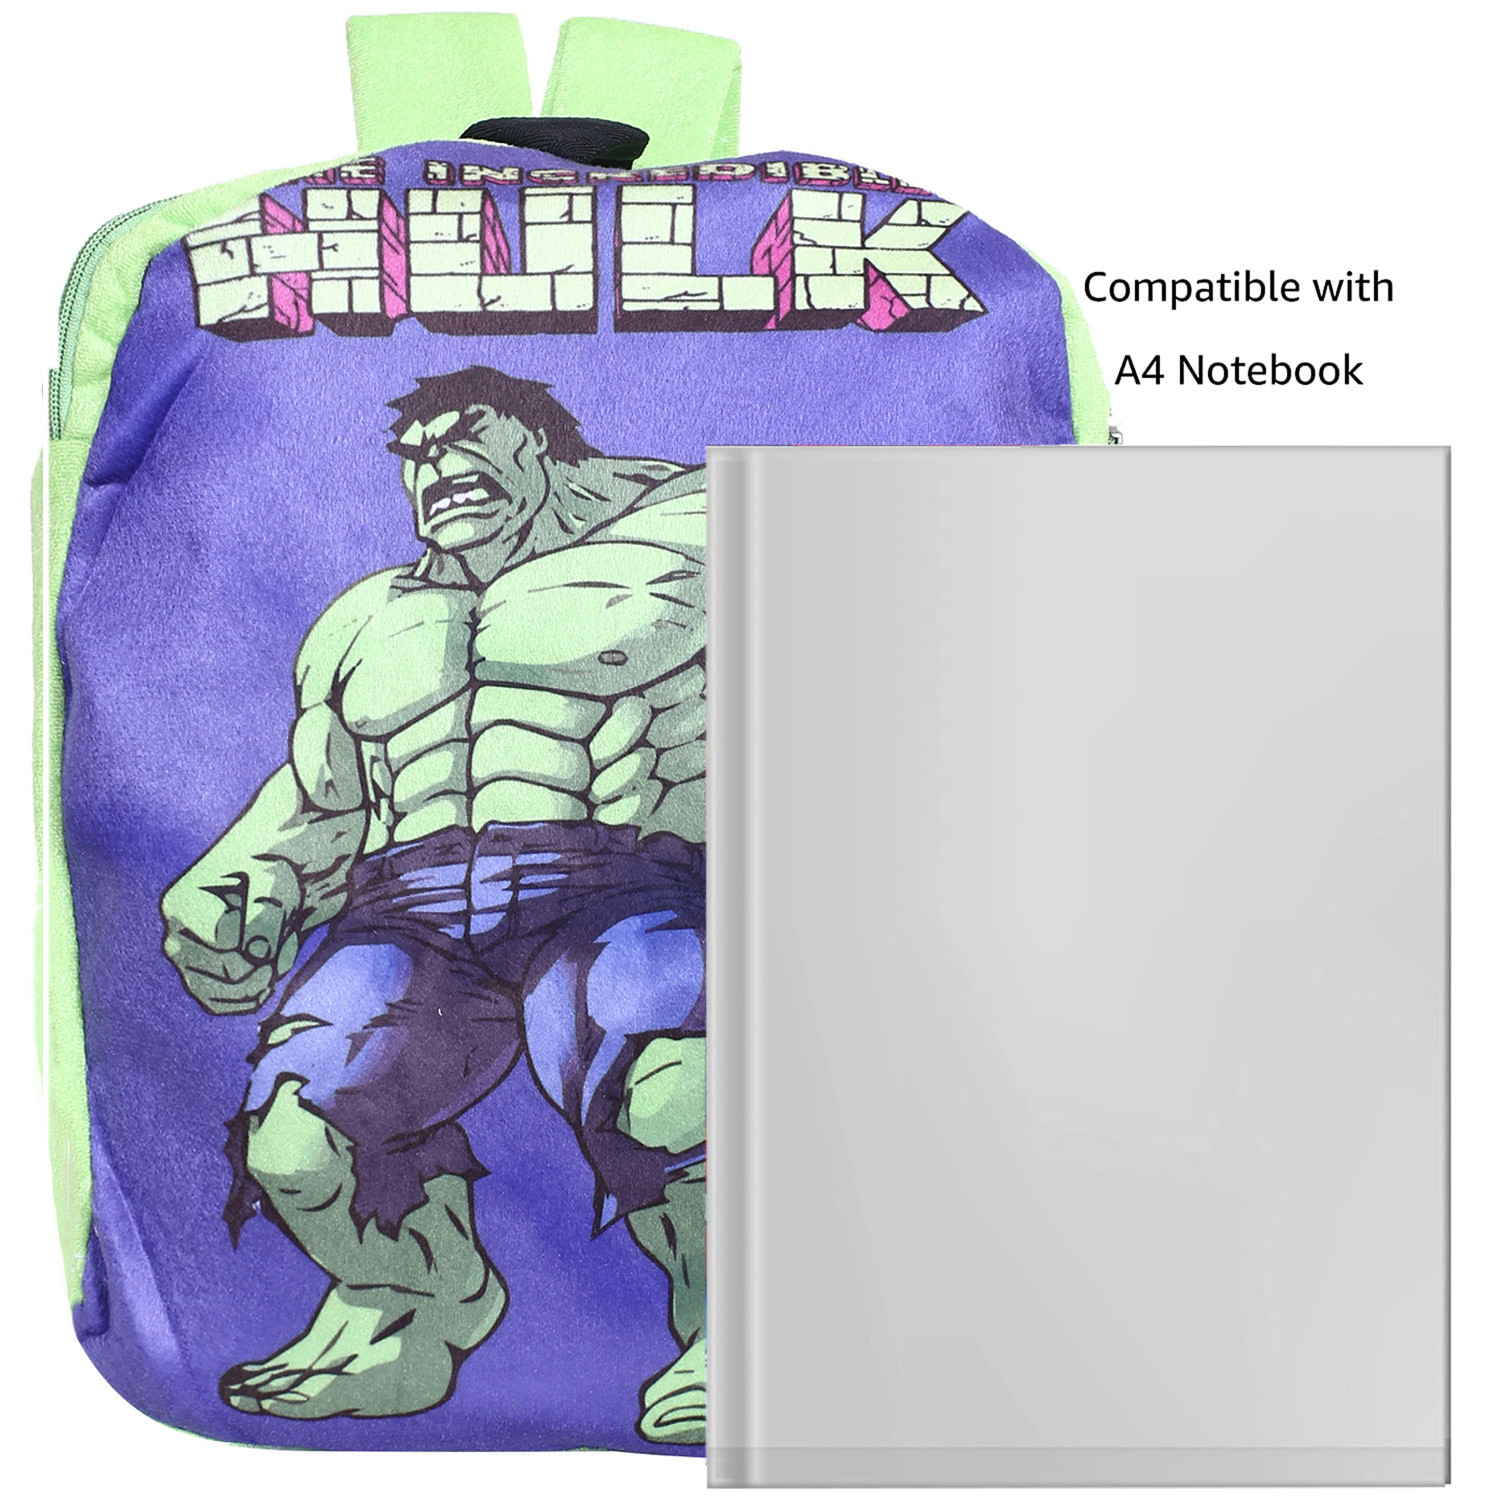 Kuber Industries Marvel The Incredible Hulk Plush Backpack|2 Compartment Velvet School Bag|Durable Toddler Haversack For Travel,School with Zipper Closure (Green)